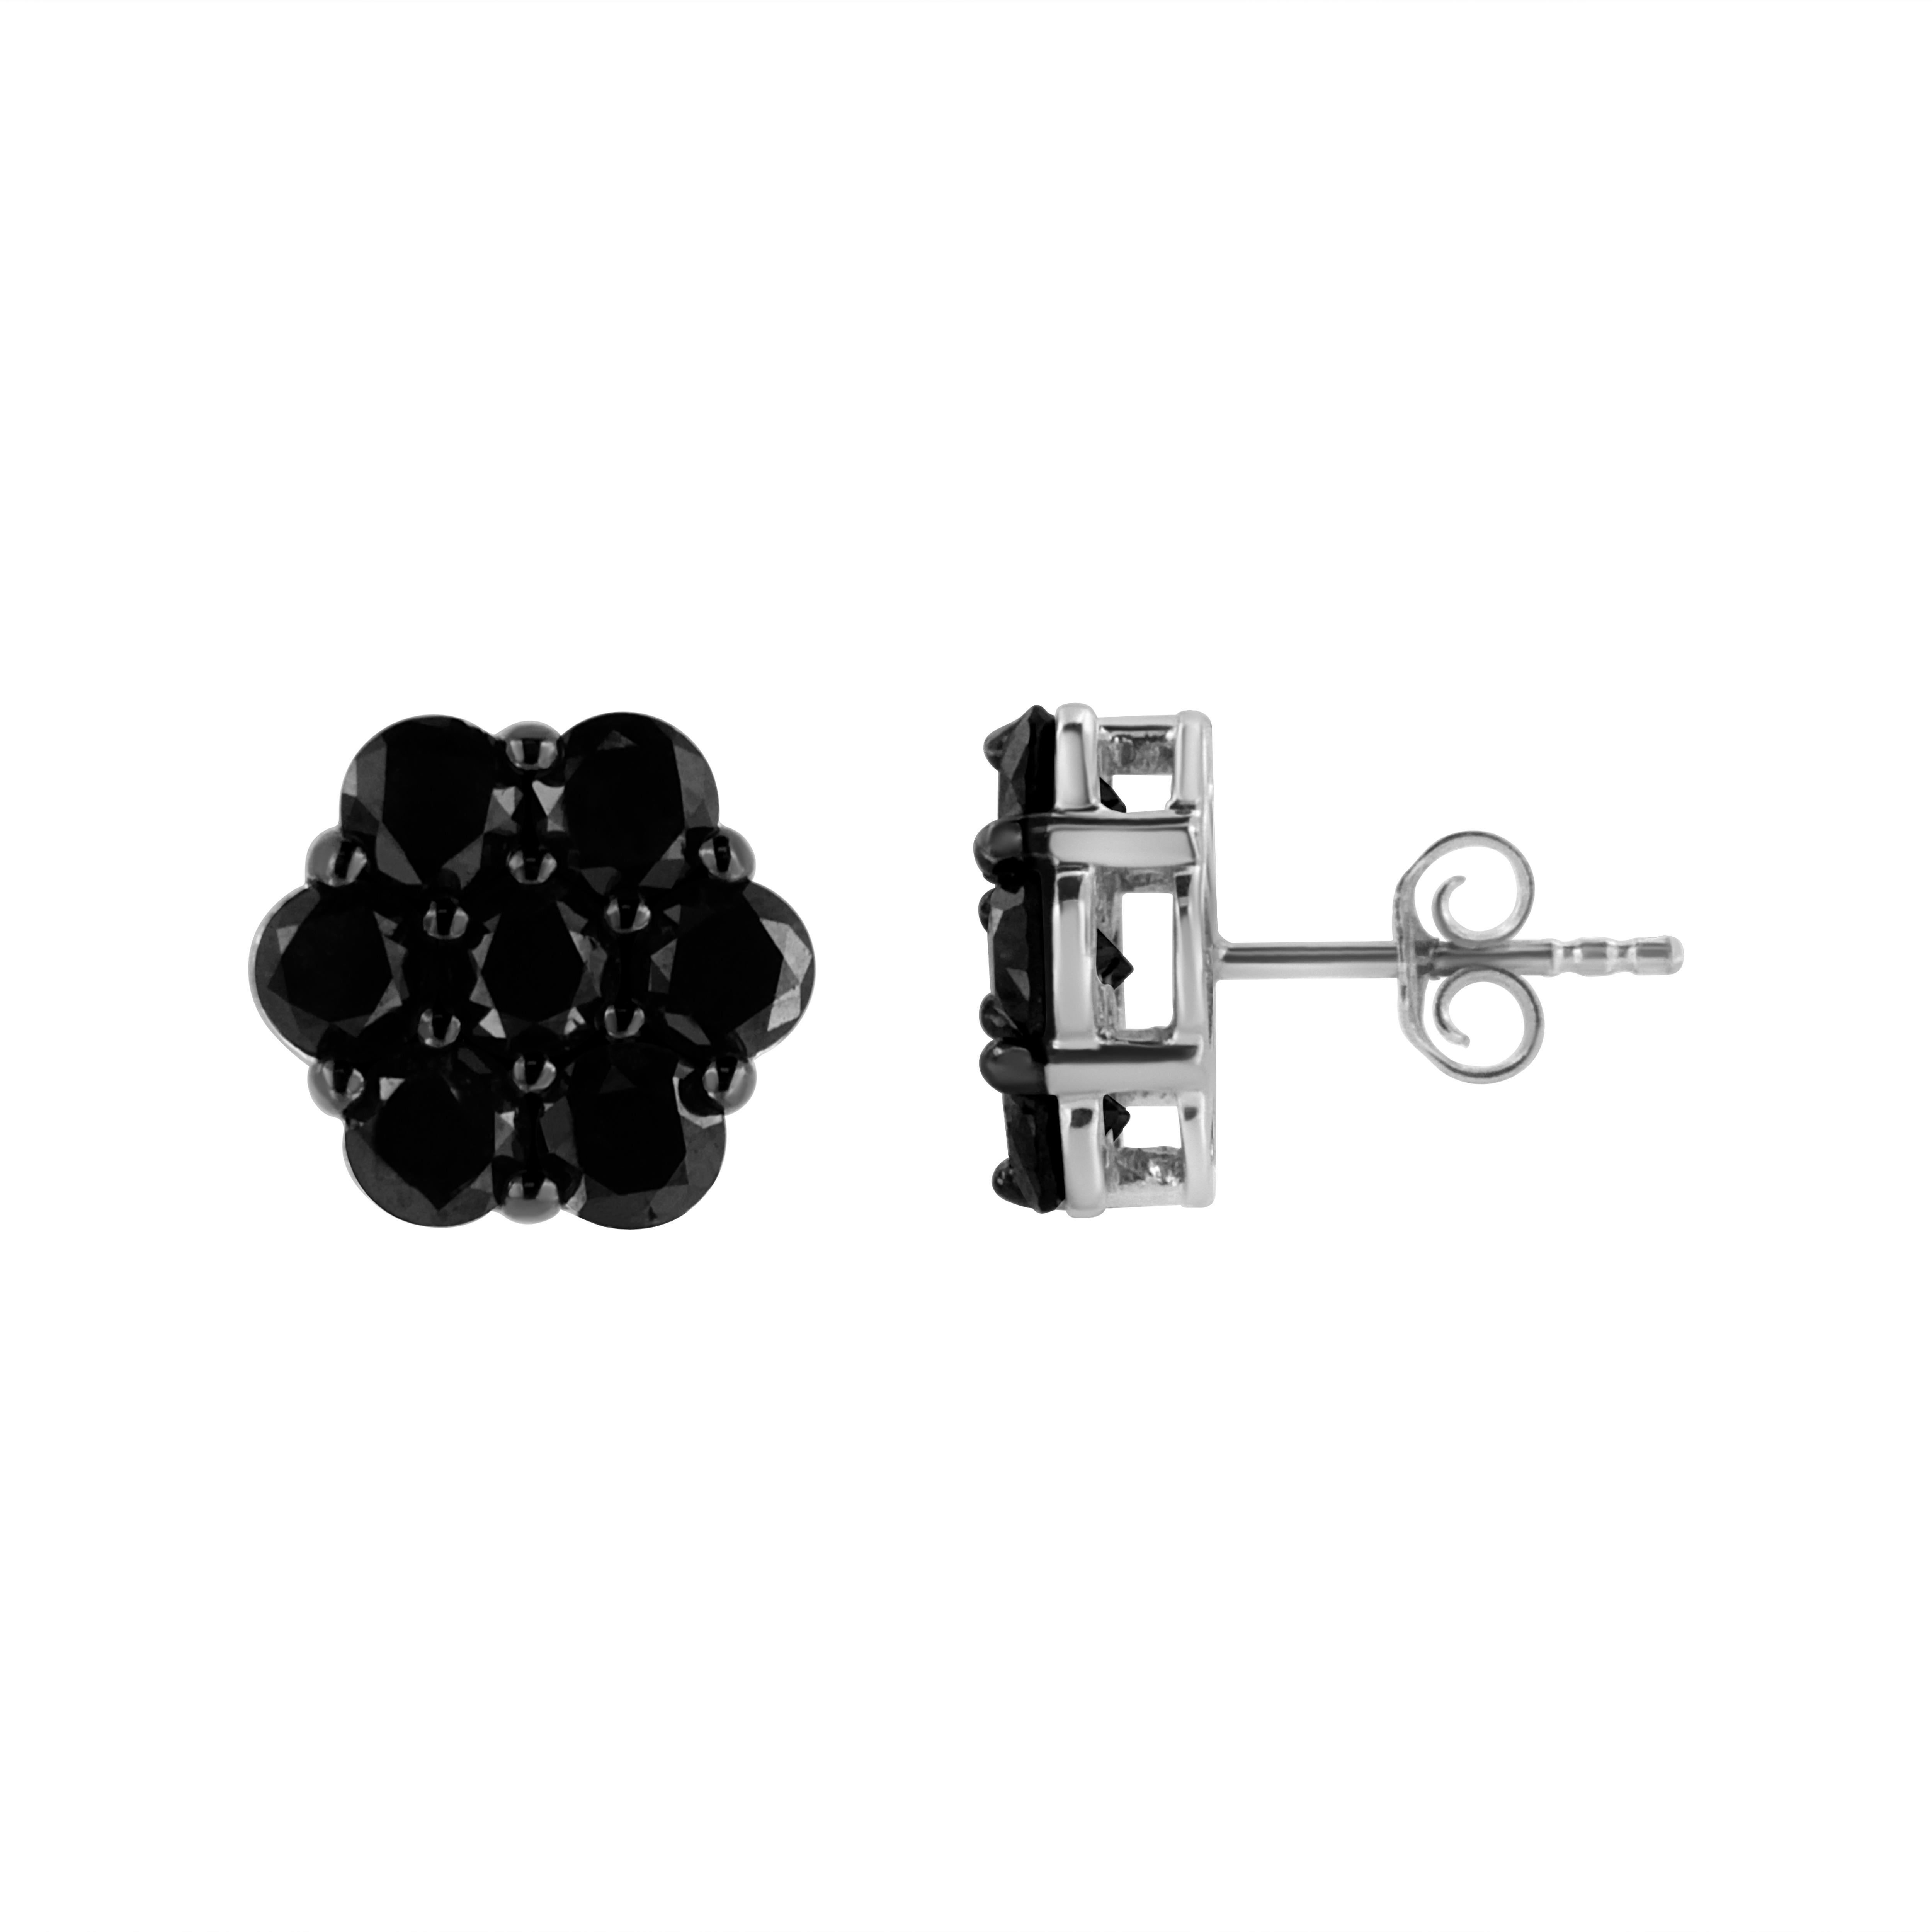 You will fall in love with these classic cluster stud earrings. A must have for any serious jewelry collection, these .925 sterling earrings boast an impressive 4.0 carat total weight of treated black diamonds with seven stones each. The earrings